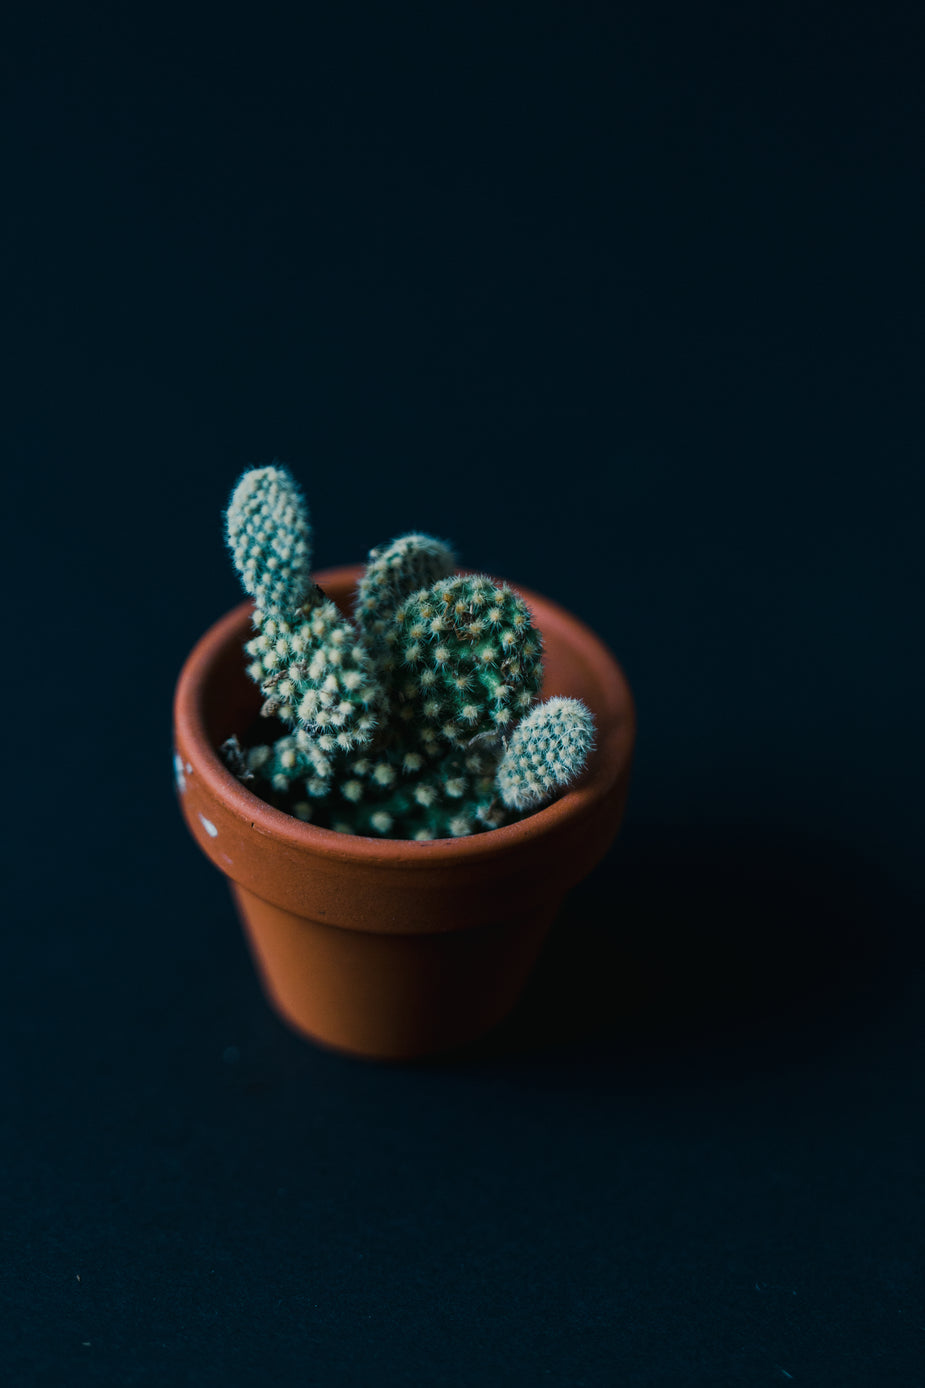 Still Life Natural Cactus Plants With Space Background Stock Photo, Picture  and Royalty Free Image. Image 95537206.